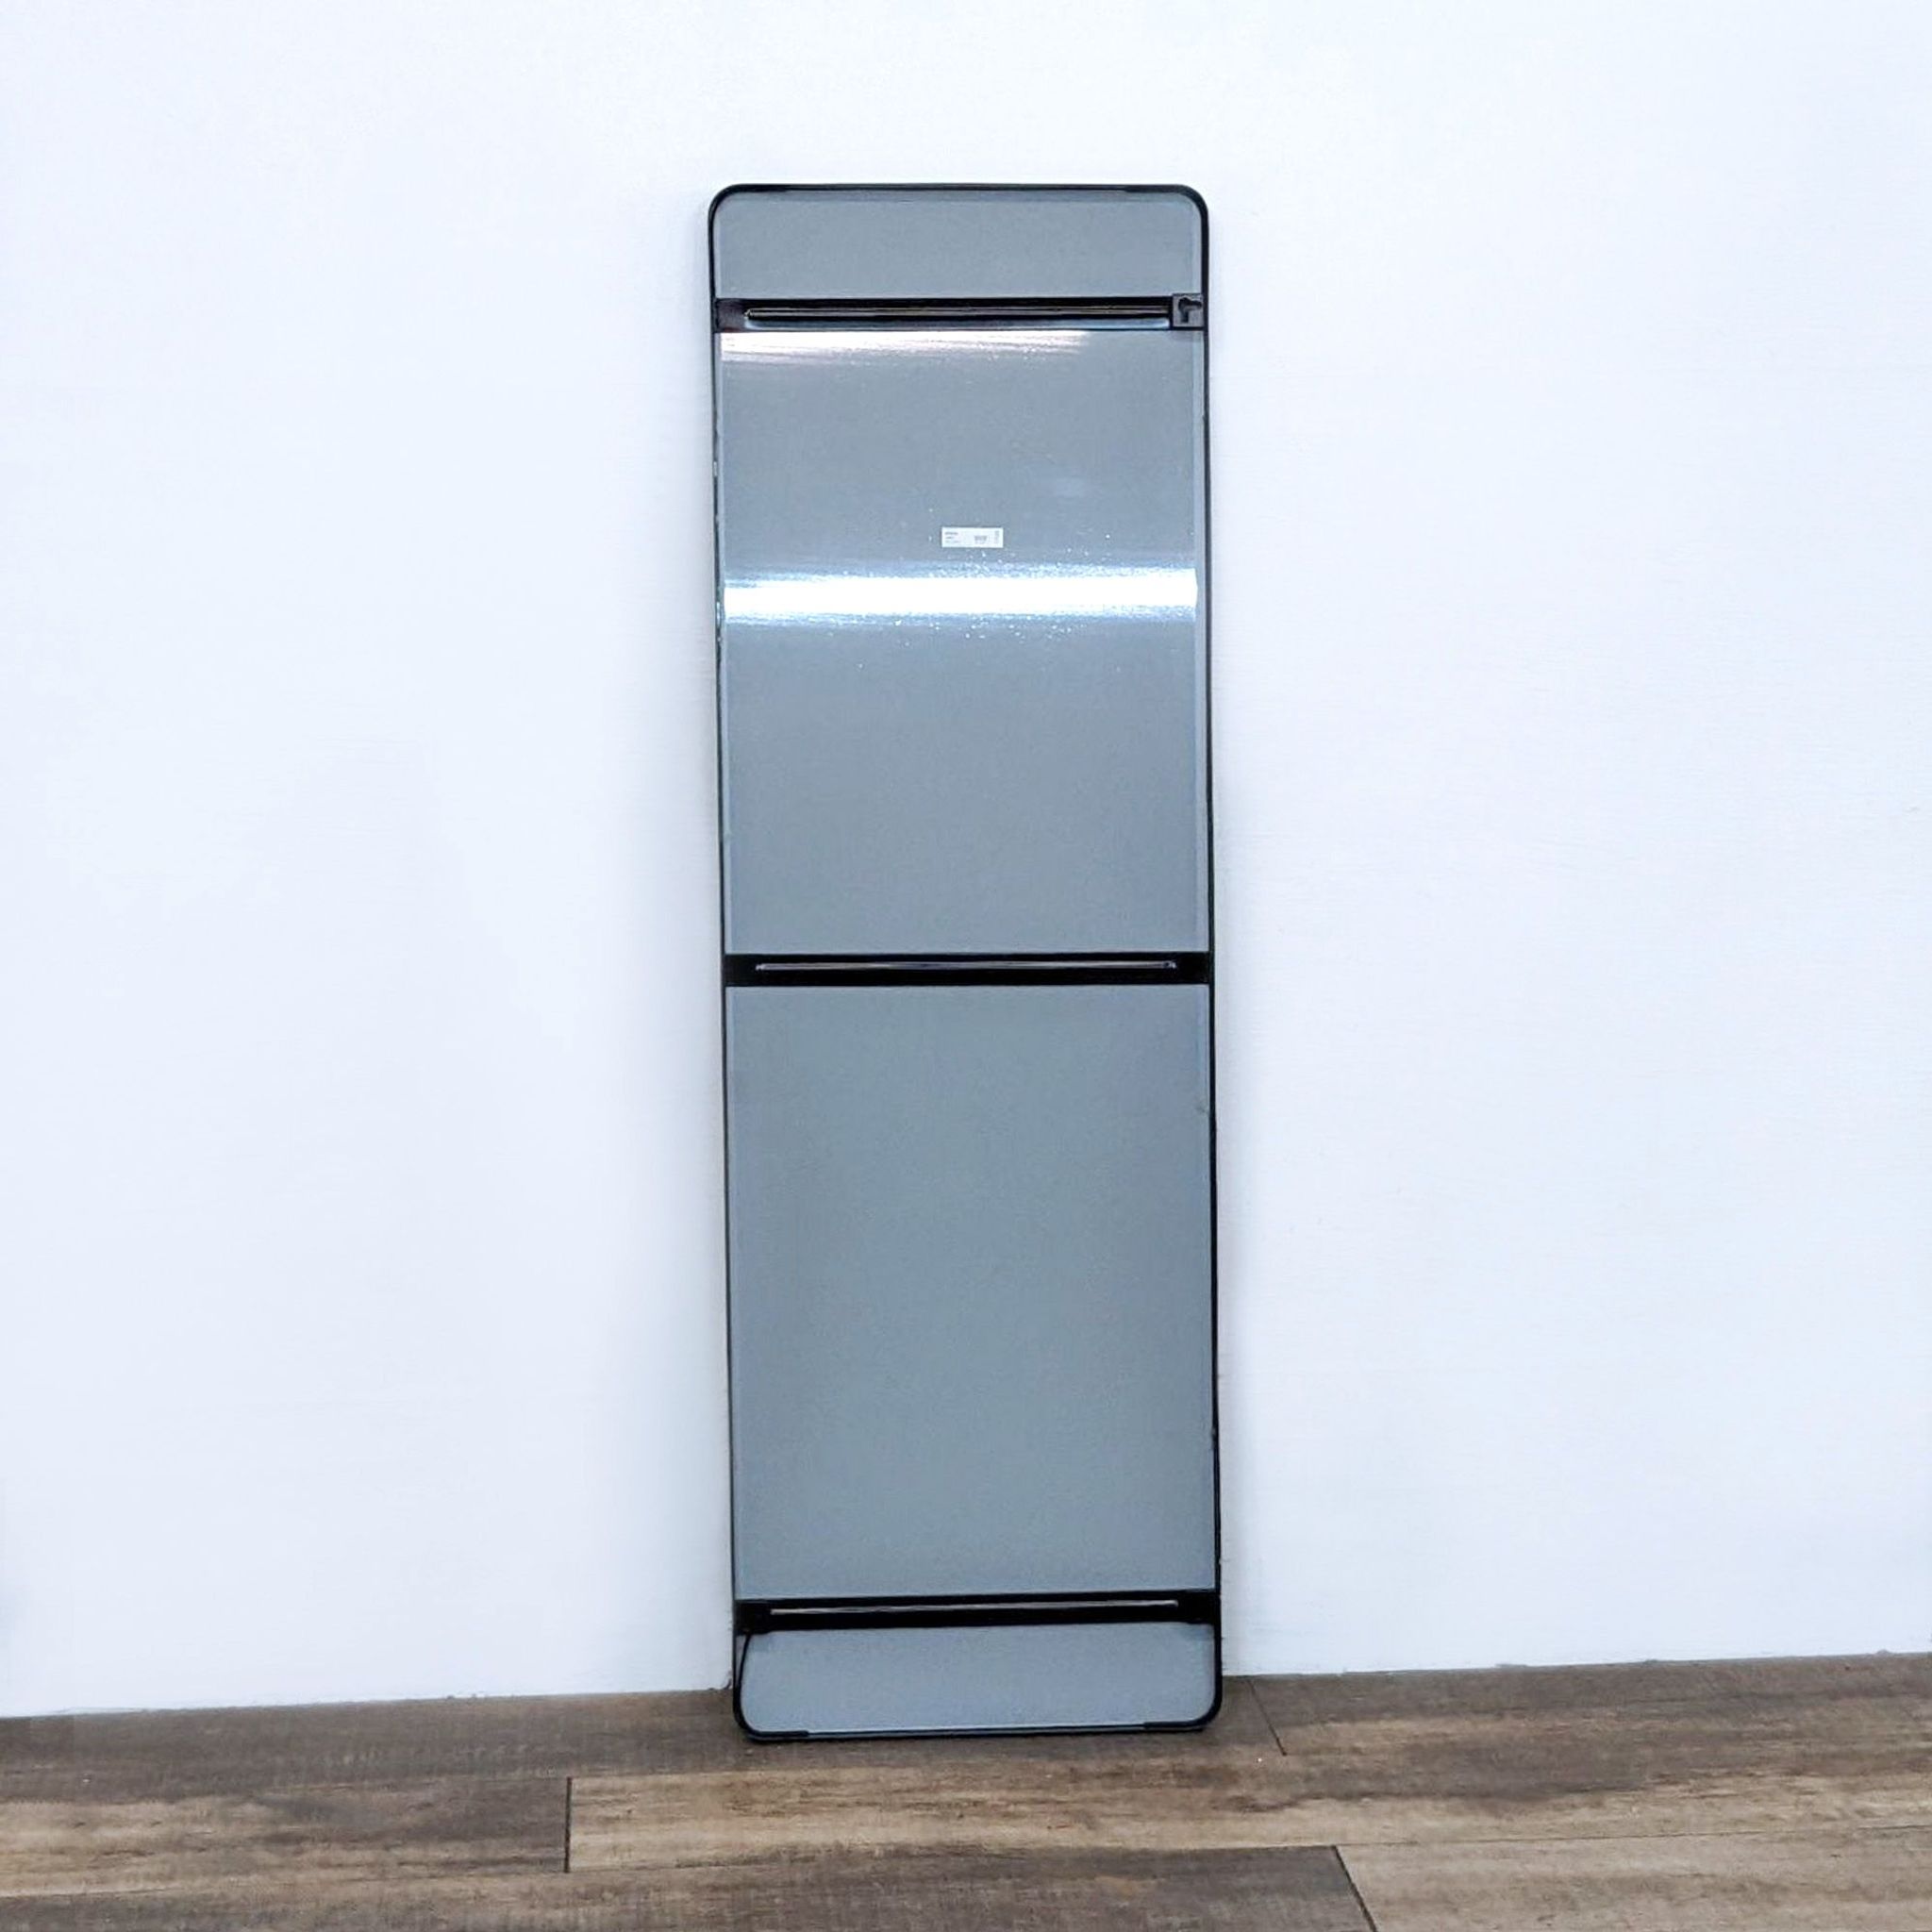 Image 3 alt: Rectangular full-length IKEA Grua mirror reflecting a white wall and a wooden floor, featuring a black frame with rounded corners.